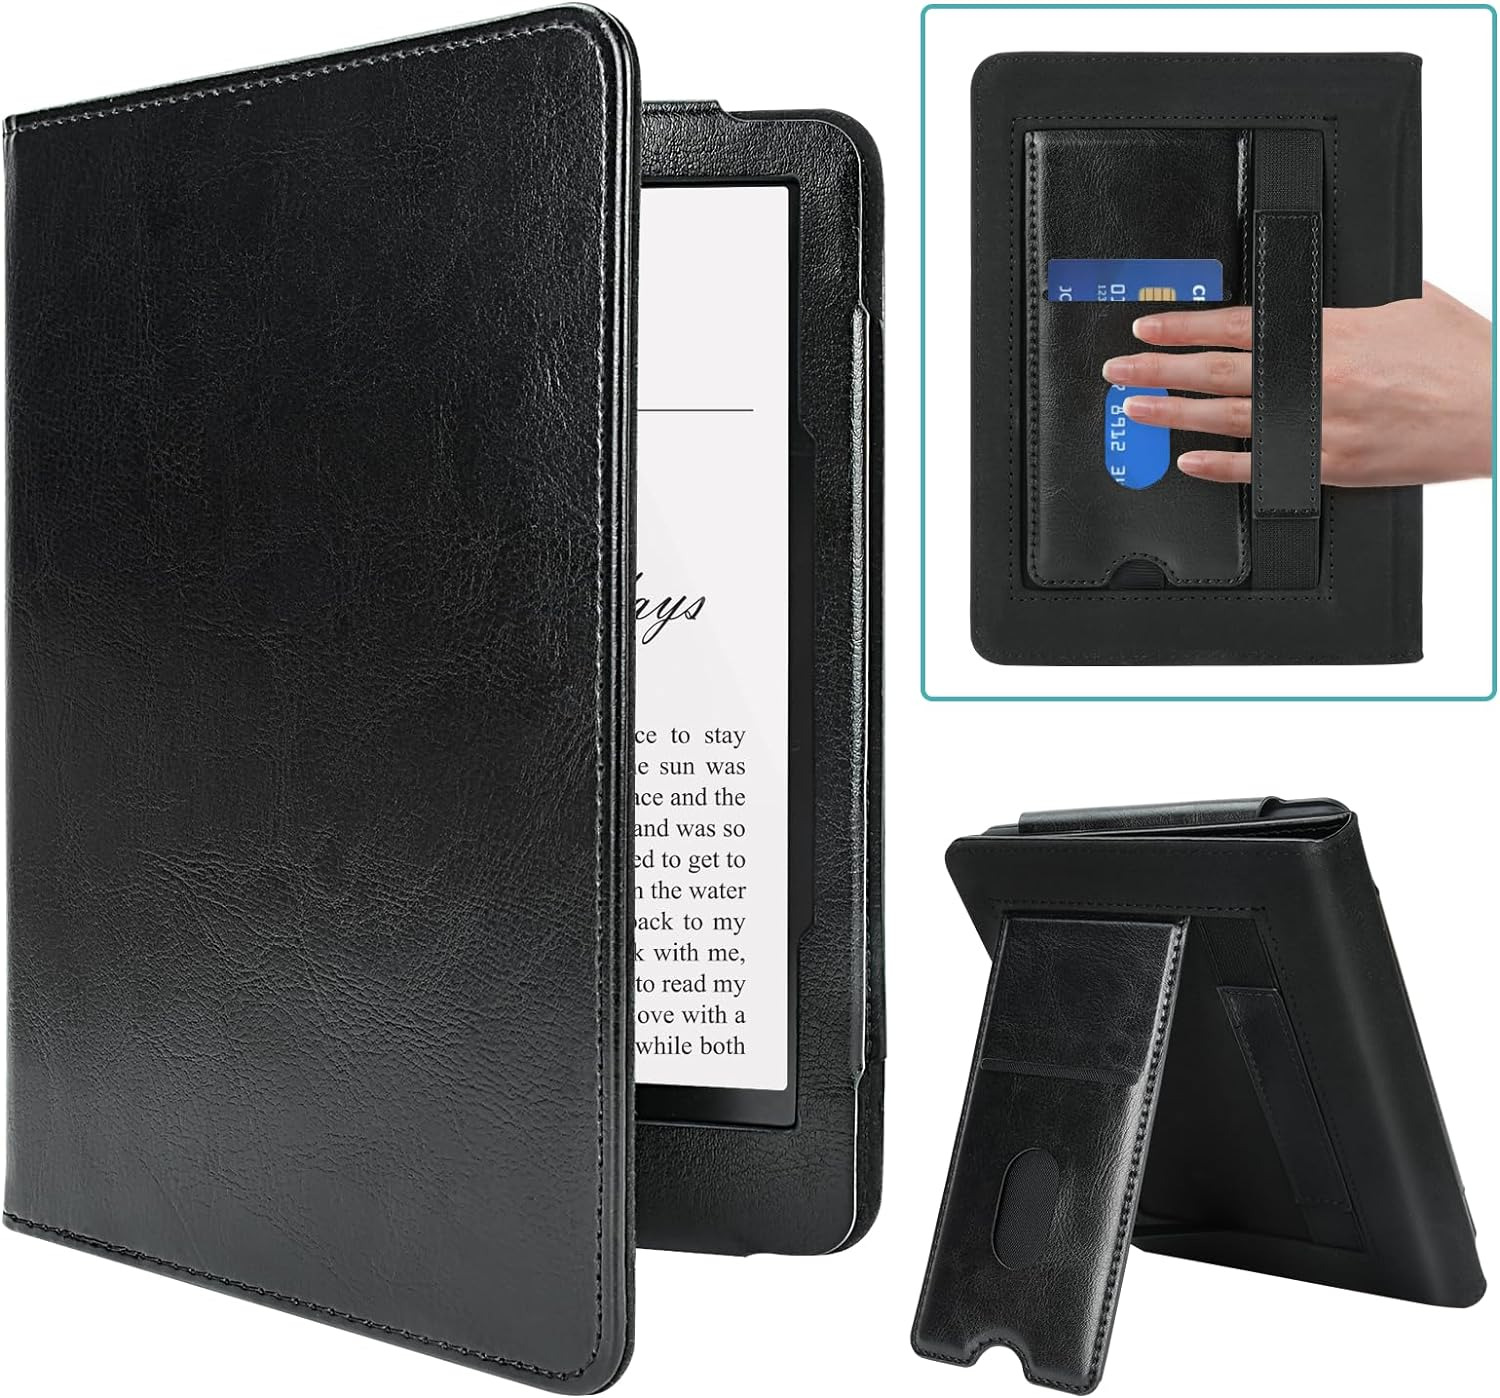 Case for Kindle Paperwhite - All New PU Leather Smart Cover with Auto Sleep Wake